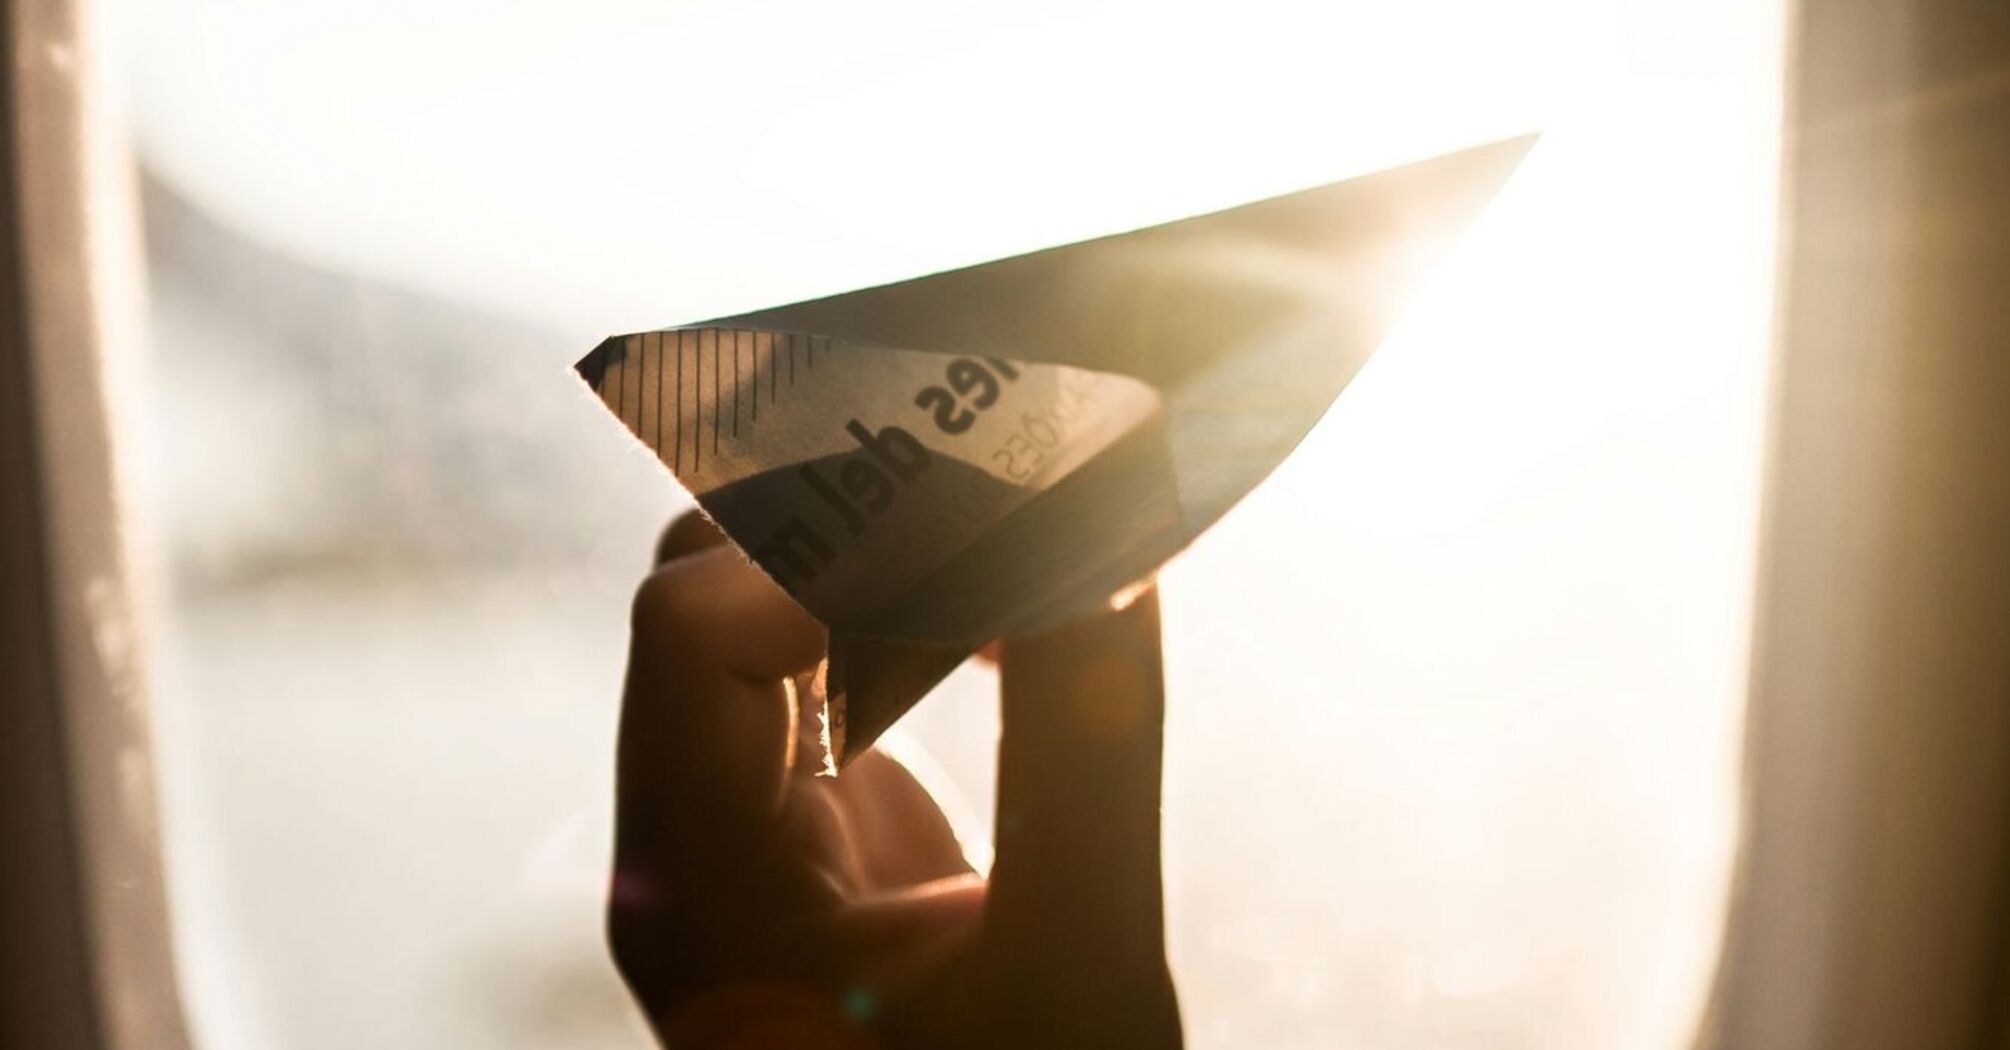 A hand holding a paper airplane against an airplane window with sunlight streaming